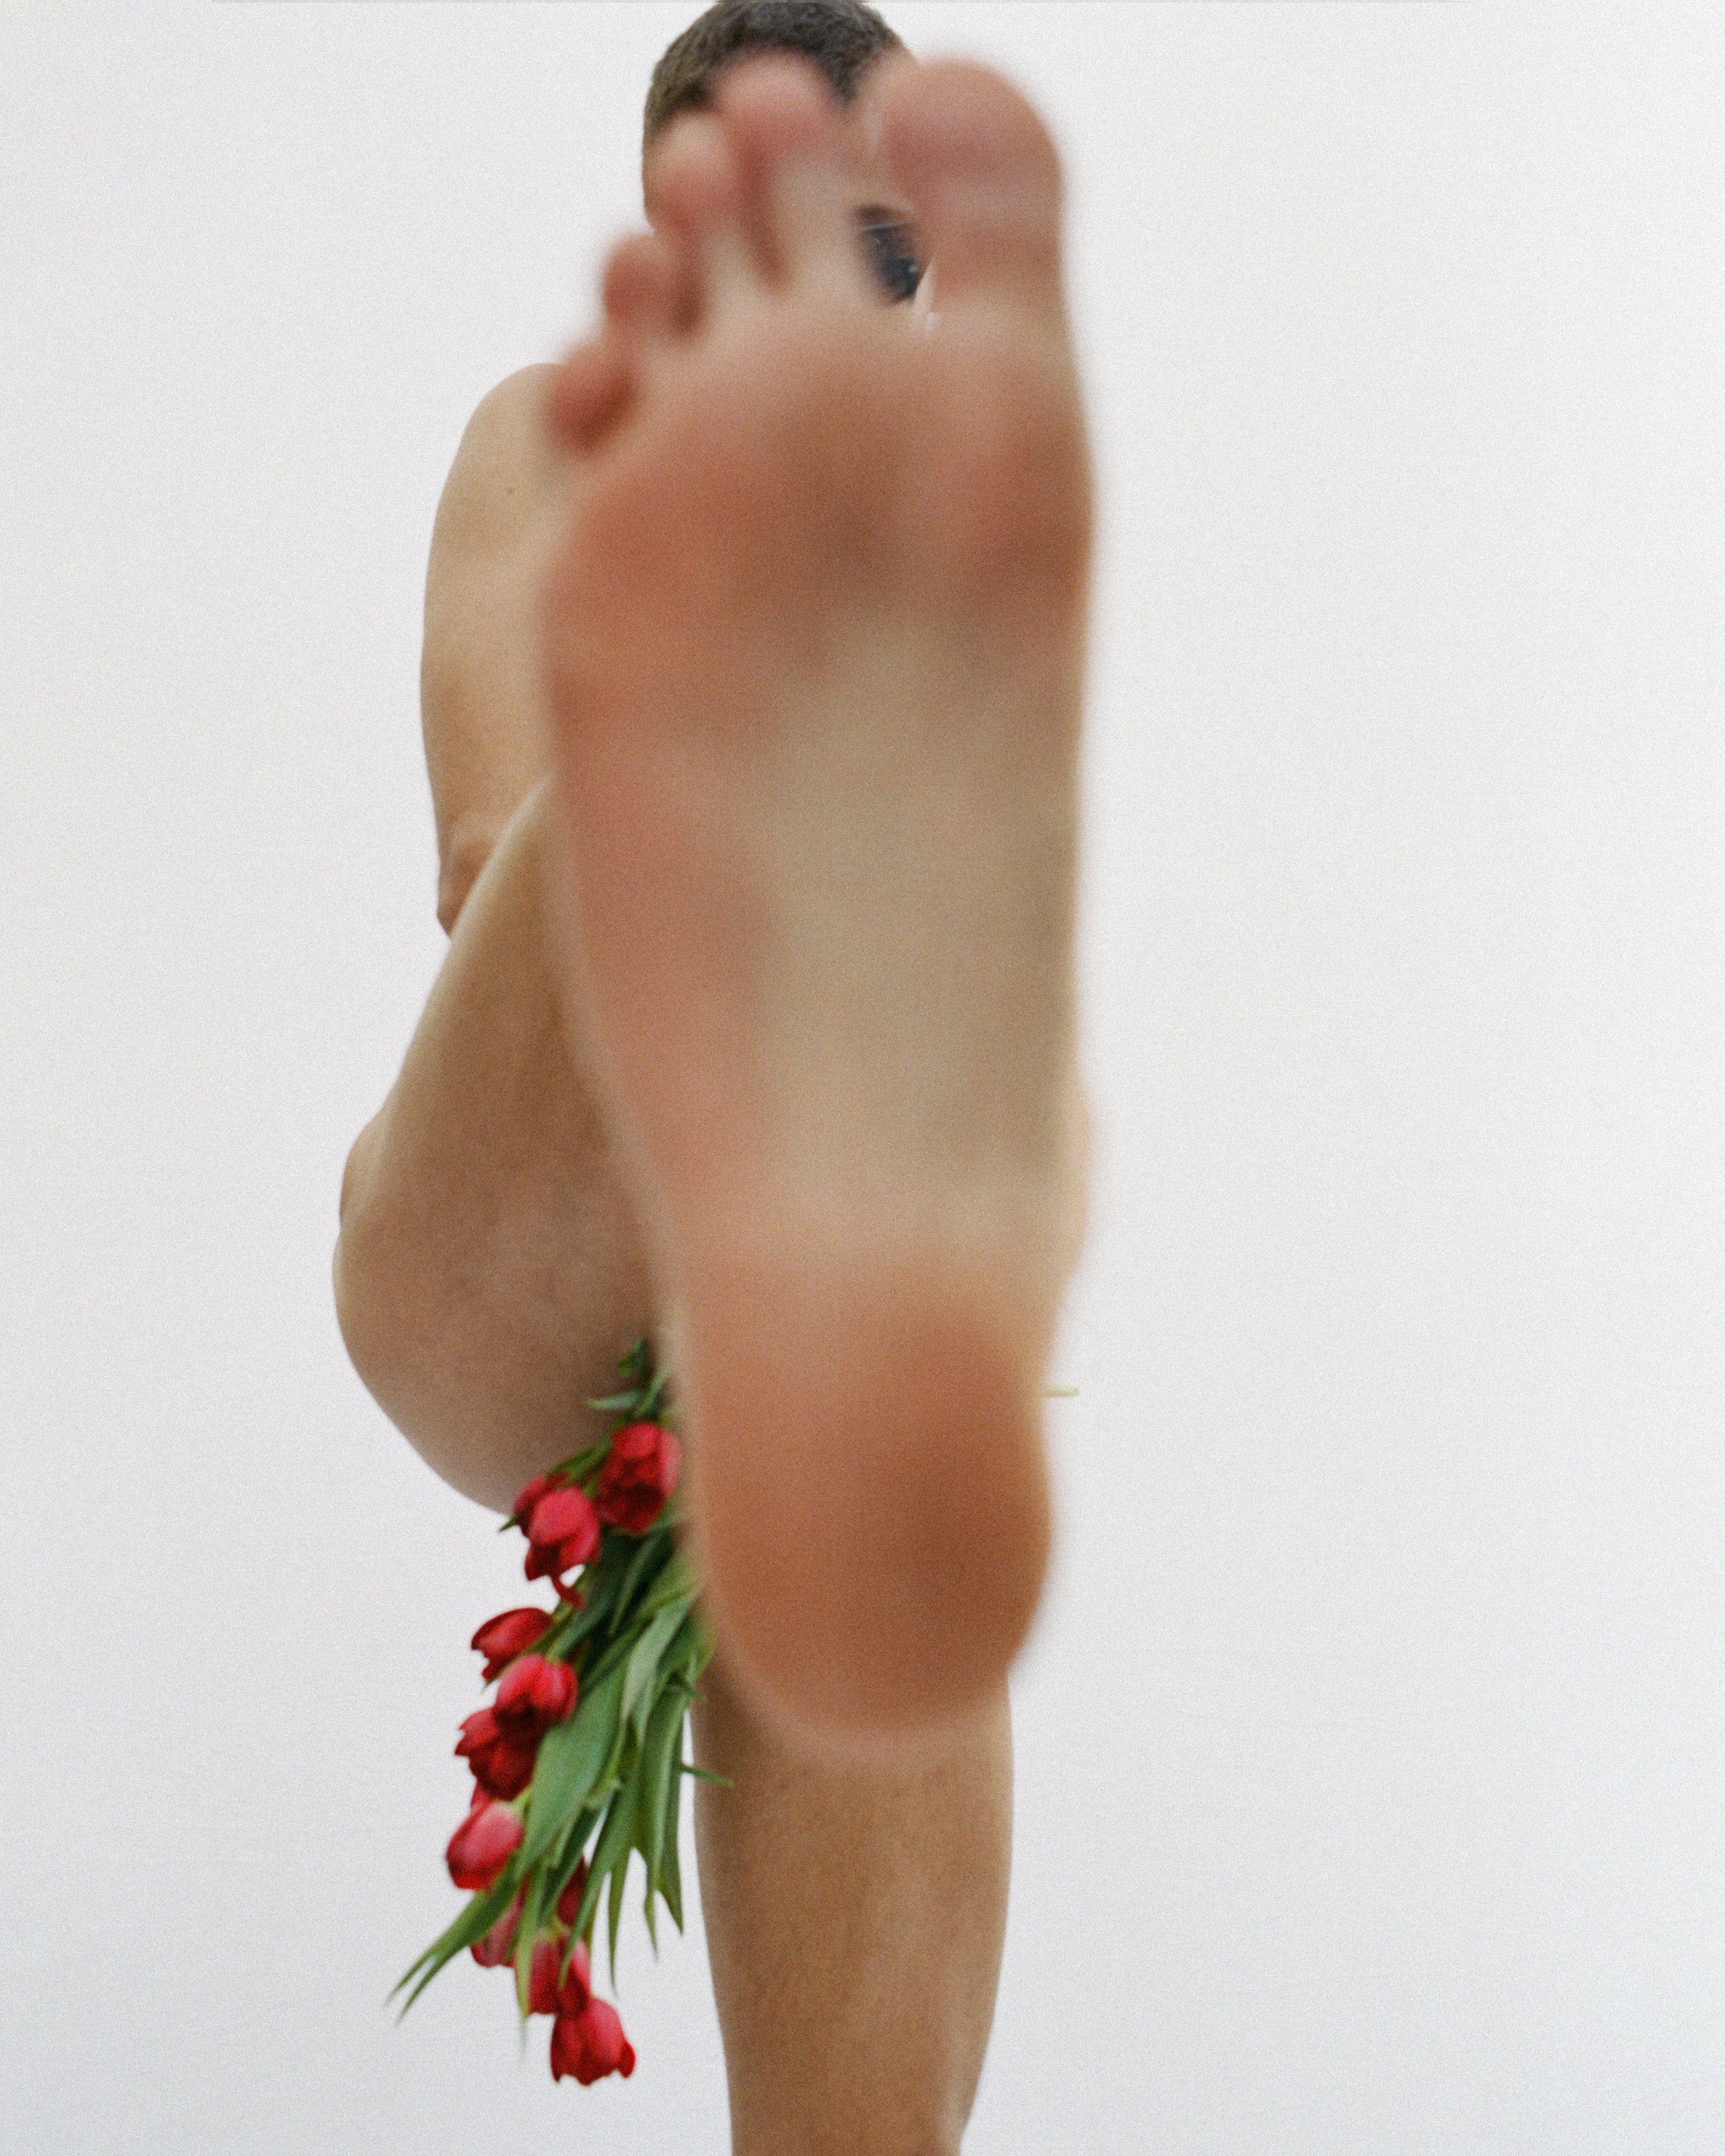 a nude person holding a bouquet of red flowers and kicking their leg up toward the camera. their bare foot obstructs most of the view of their body.